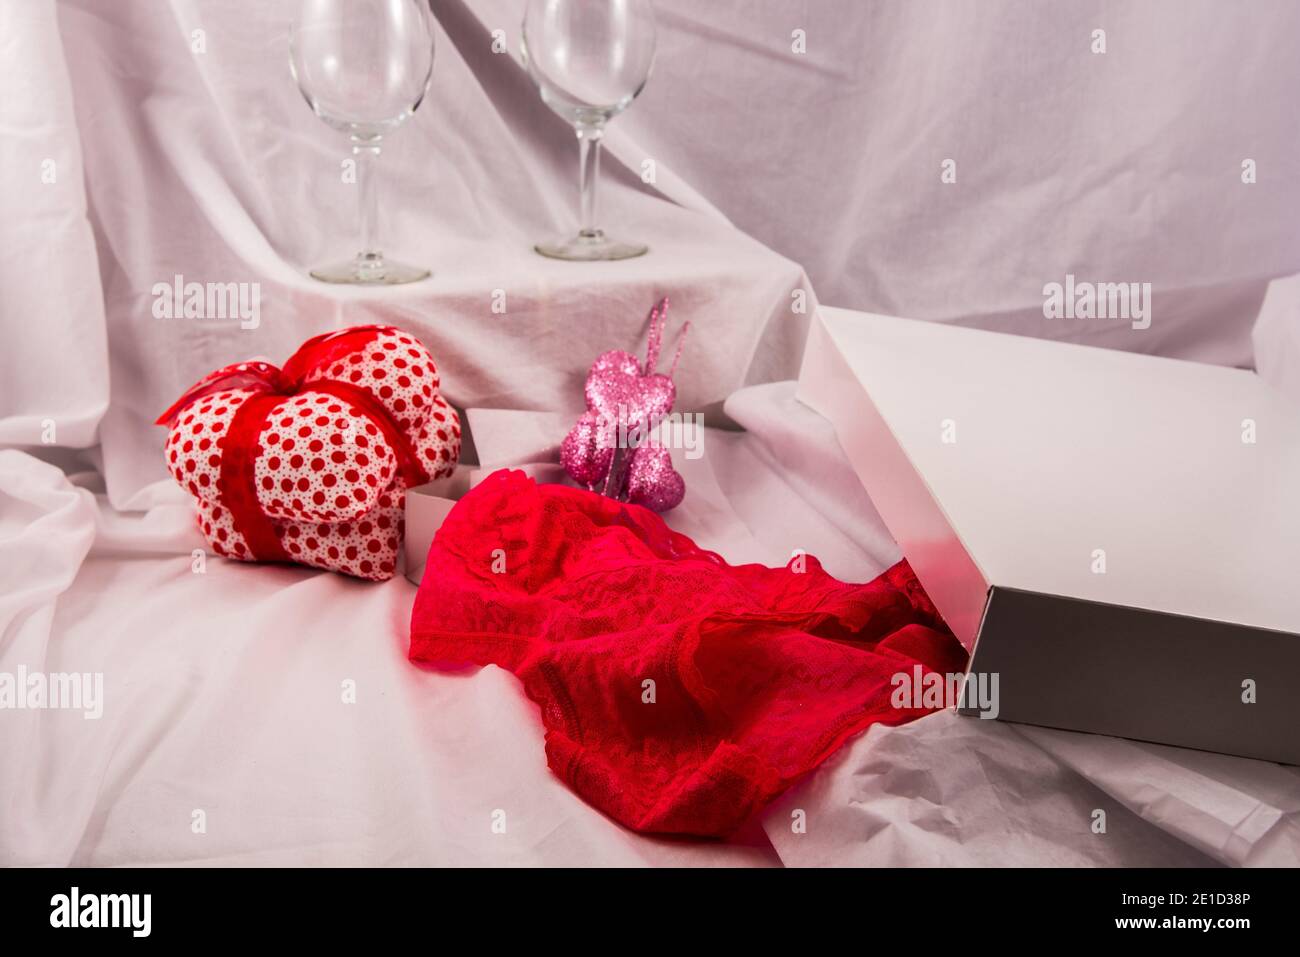 Lacey lingerie, ornamental hearts, and wine are all symbolic of the Valentine Holiday. Stock Photo